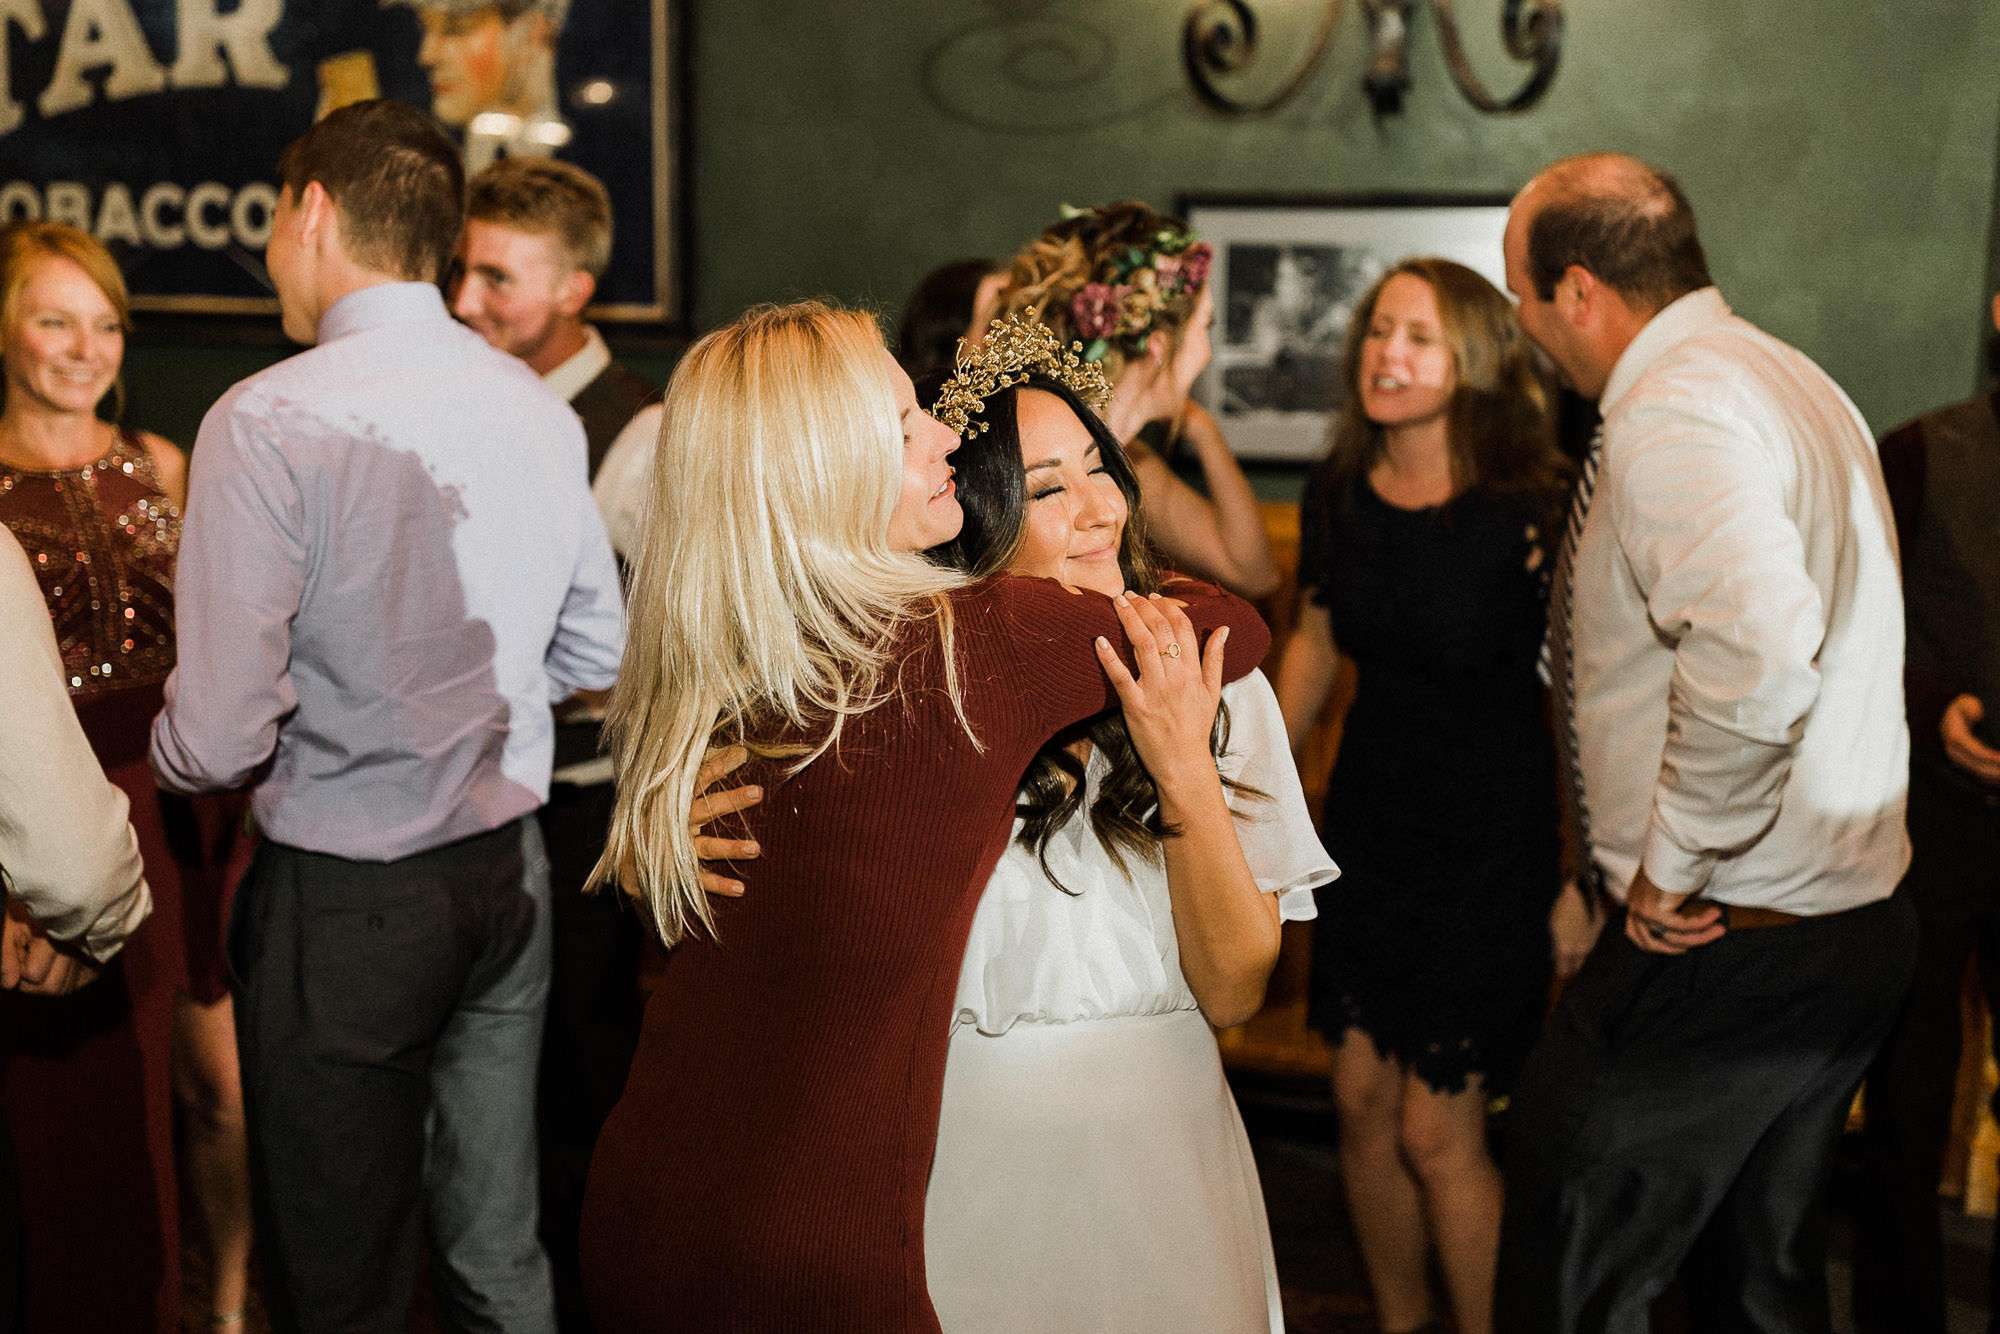 Guests dance at reception at McMenamin's in Bend